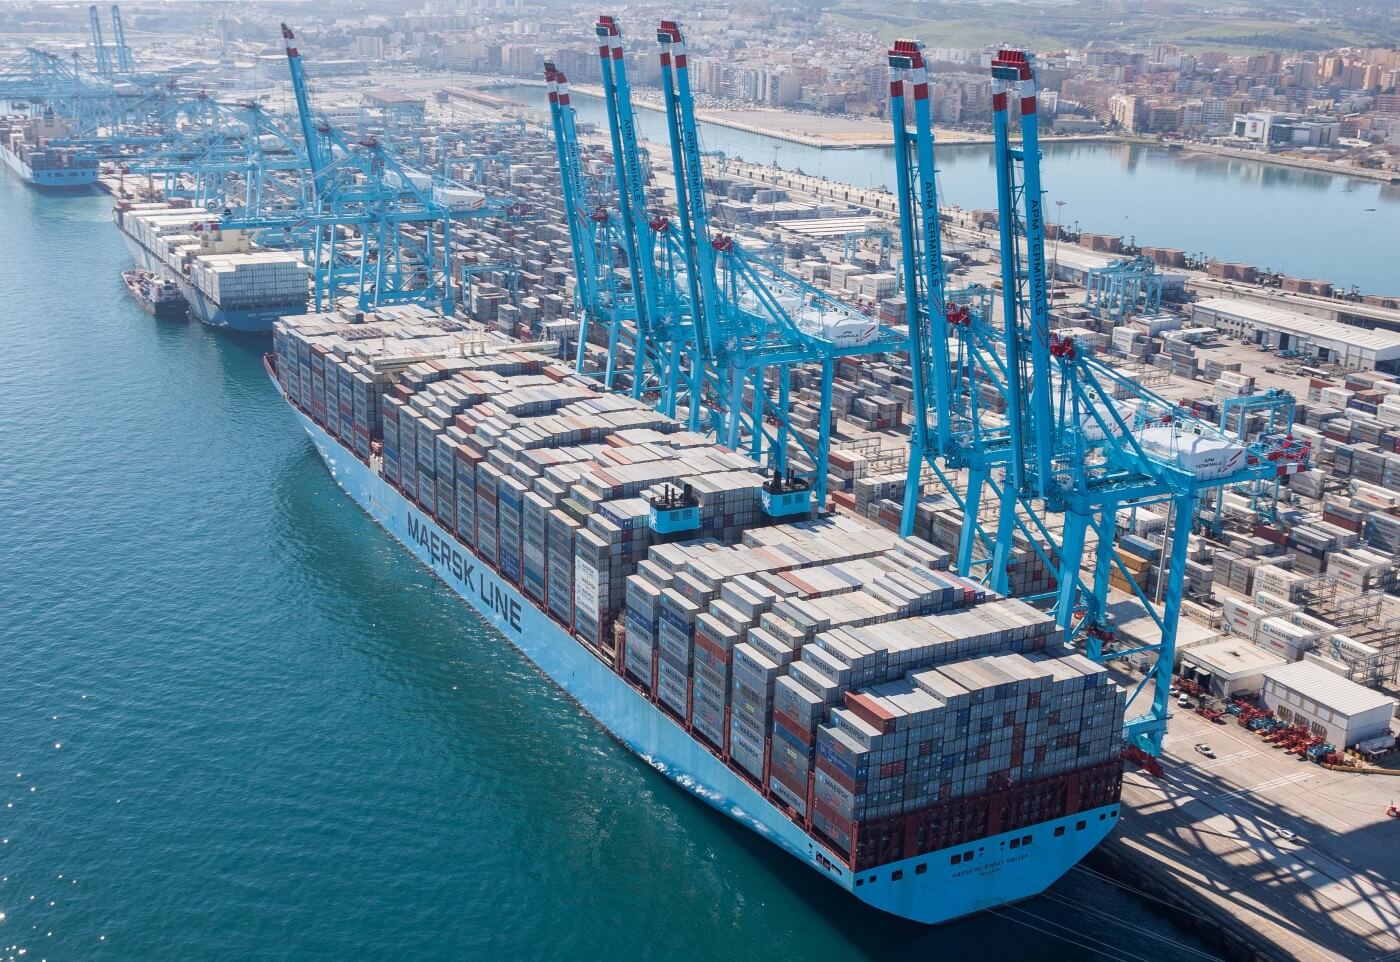 Top 5: The busiest container ports in the Mediterranean